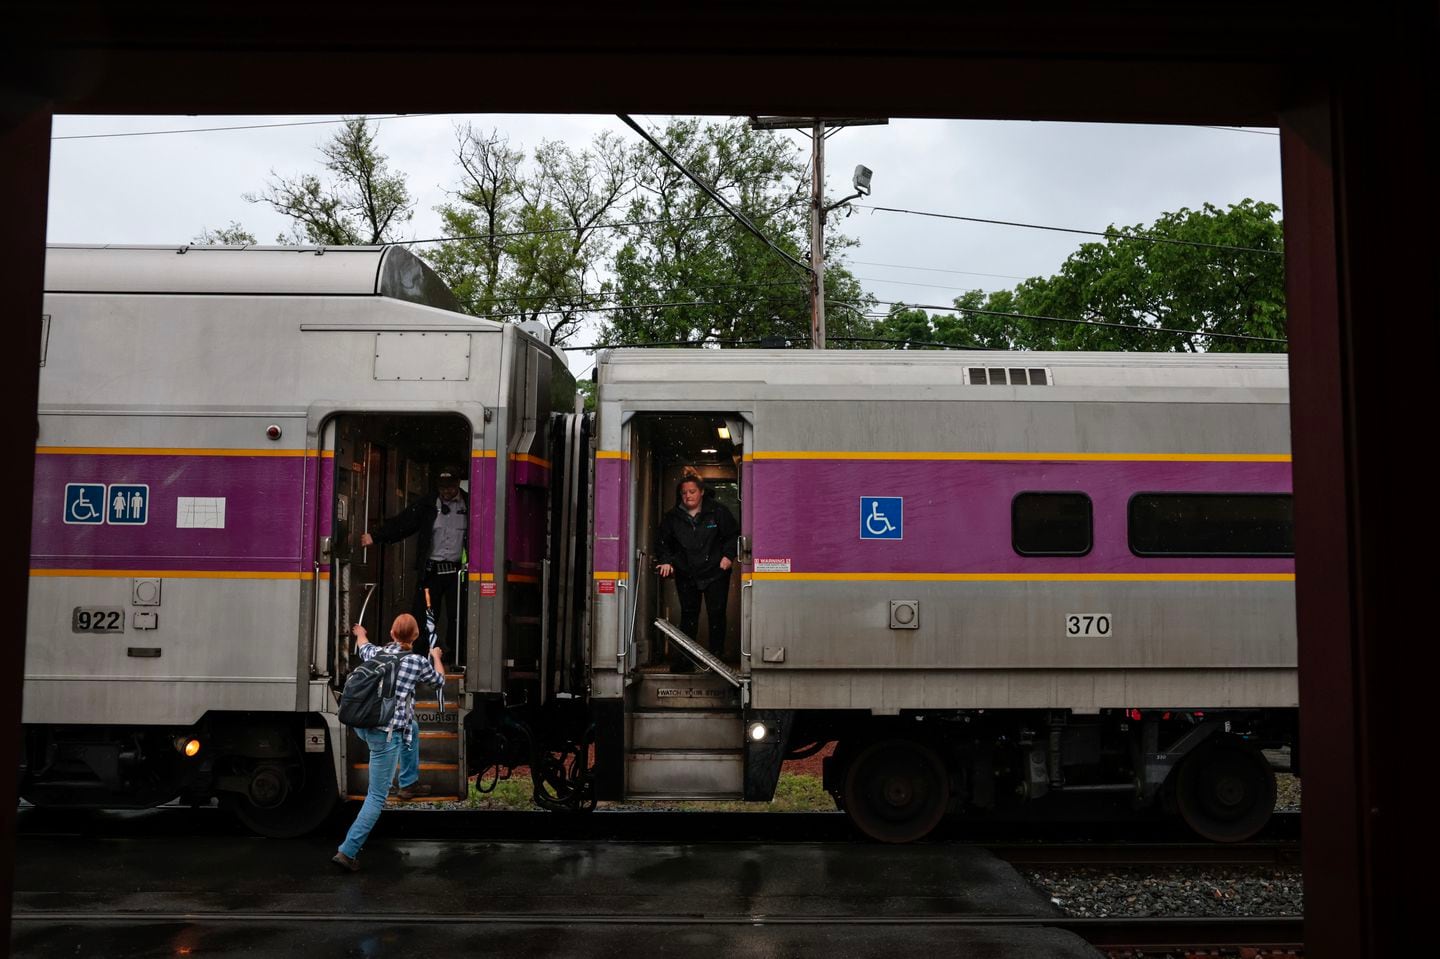 A commuter hoisted herself onto an inbound train at the MBTA Fitchburg Line commuter rail station in Shirley, Mass.